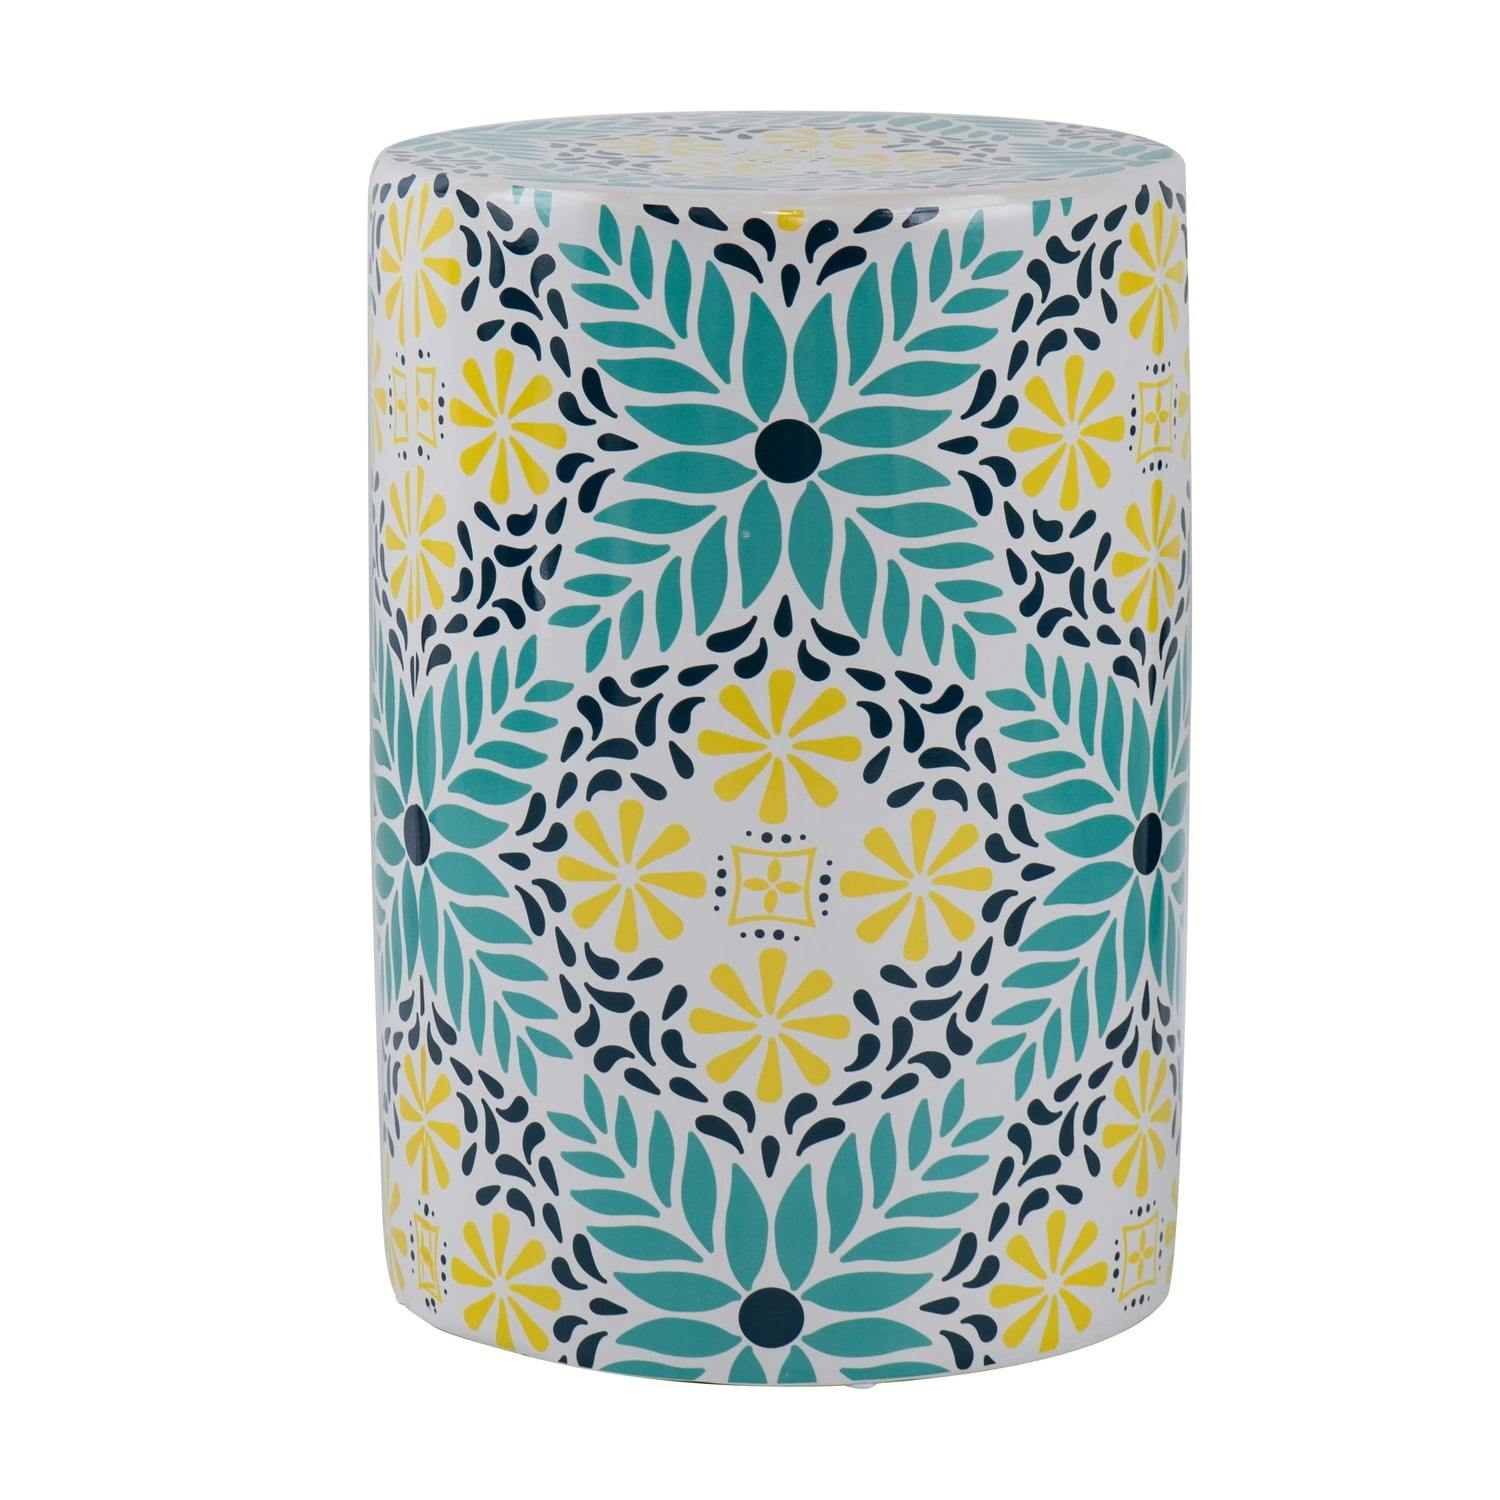 Capri Floral-Patterned Ceramic Garden Stool, 13"x18" - Teal and Yellow